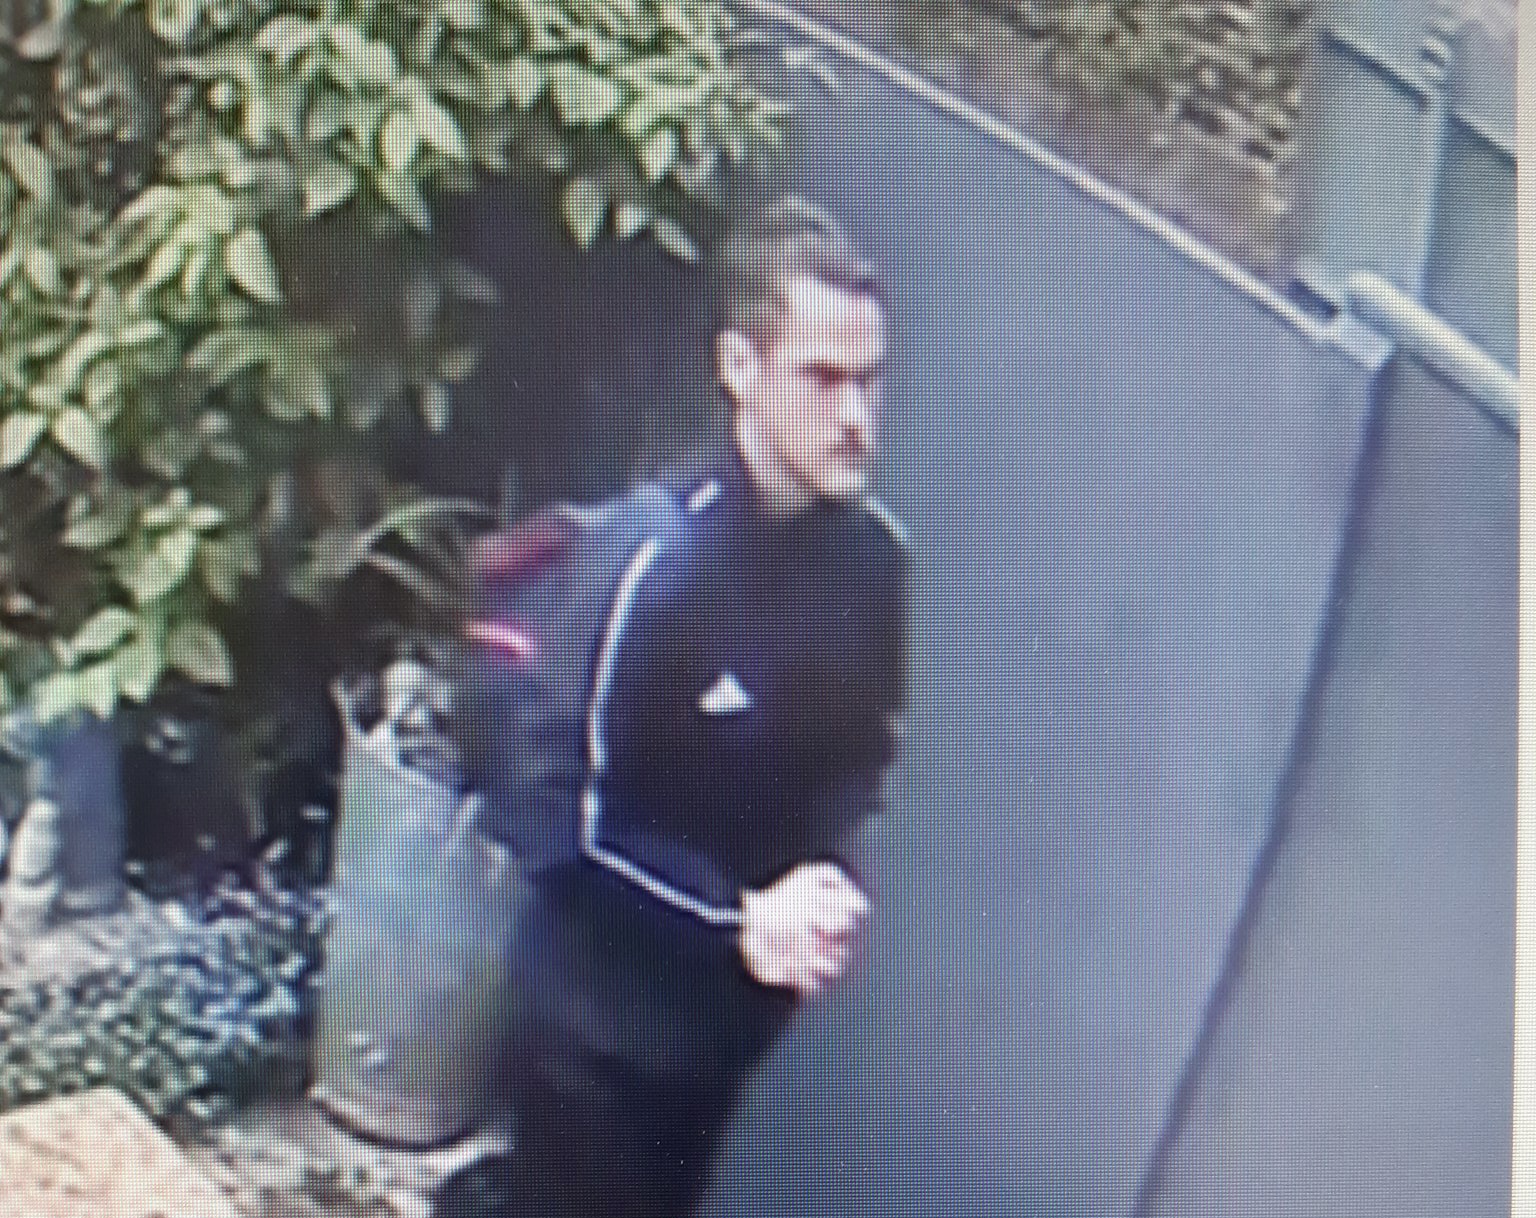 NEWS | Do you recognise this man? Police would like to speak to him